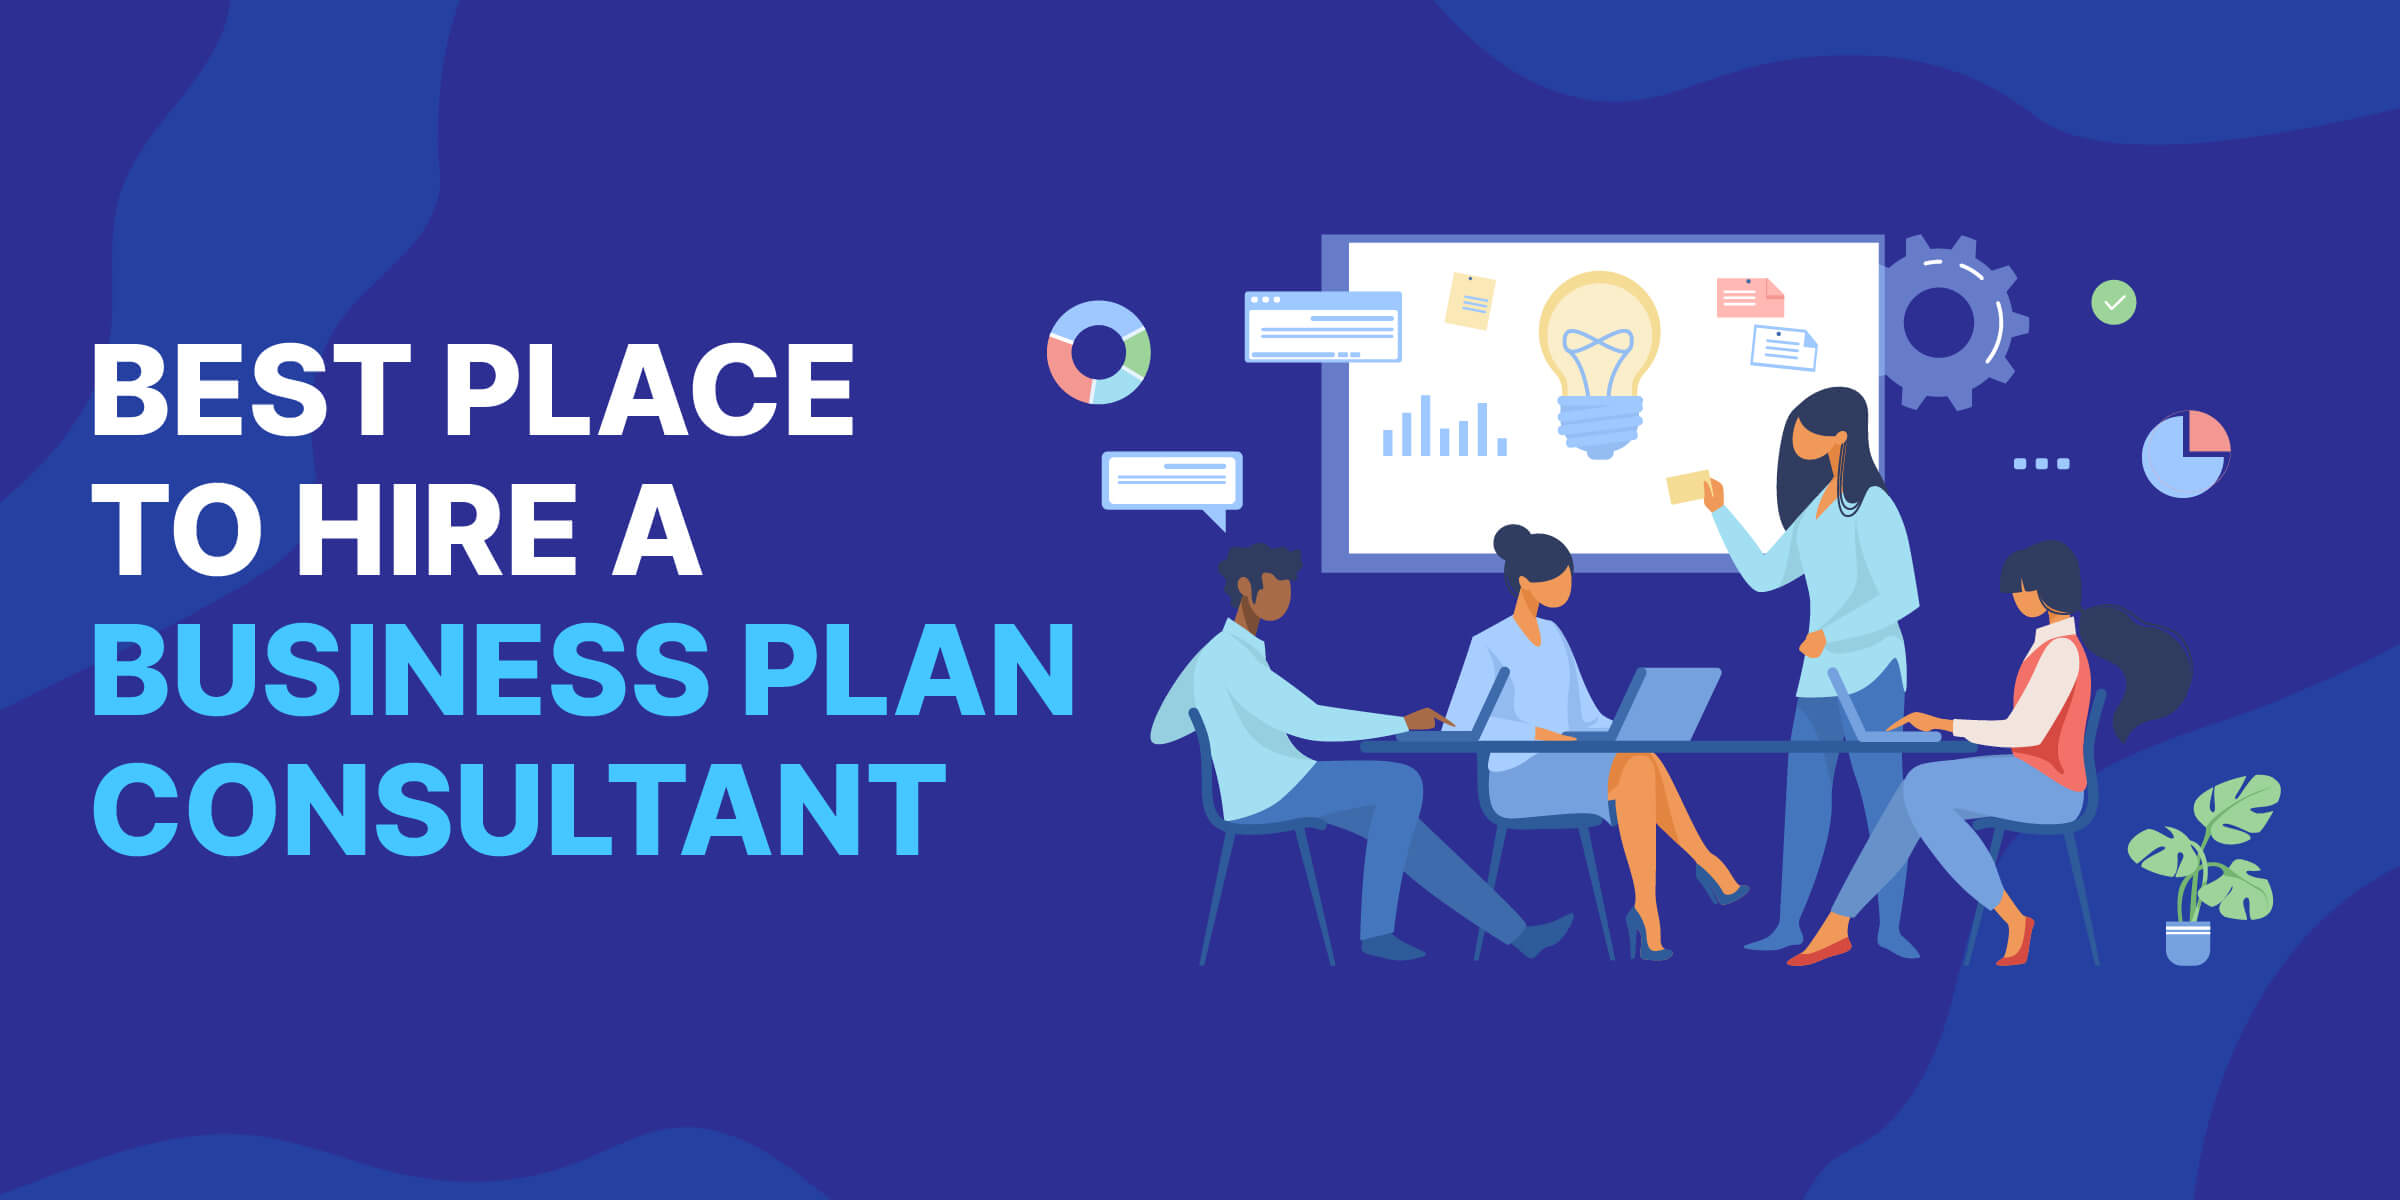 Best Place to Hire Business Plan Consultant